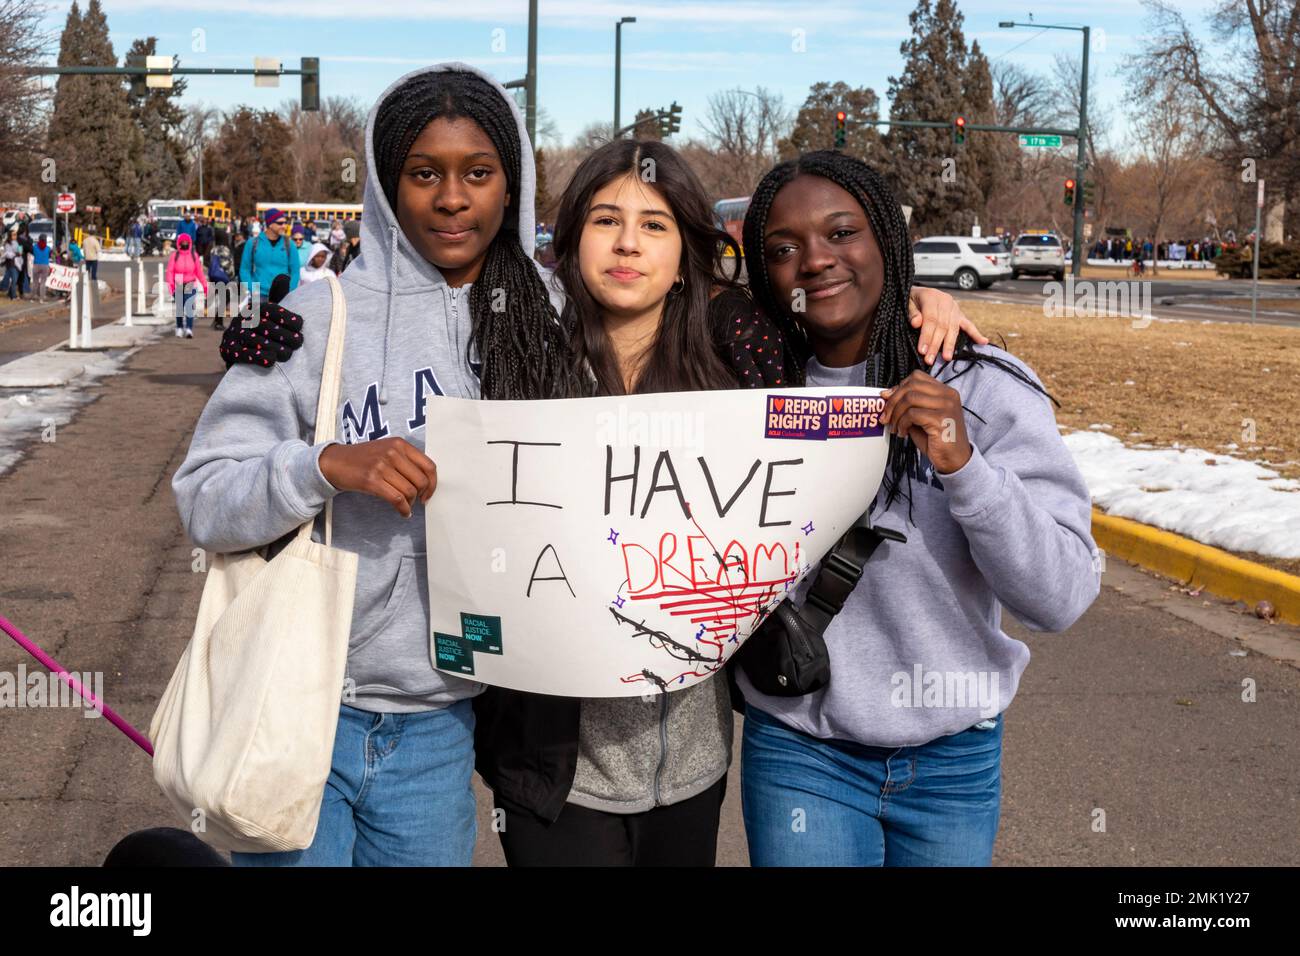 Denver, Colorado - The annual Martin Luther King Day Marade (march + parade). Three young women carry a 'I Have a Dream' sign. Stock Photo